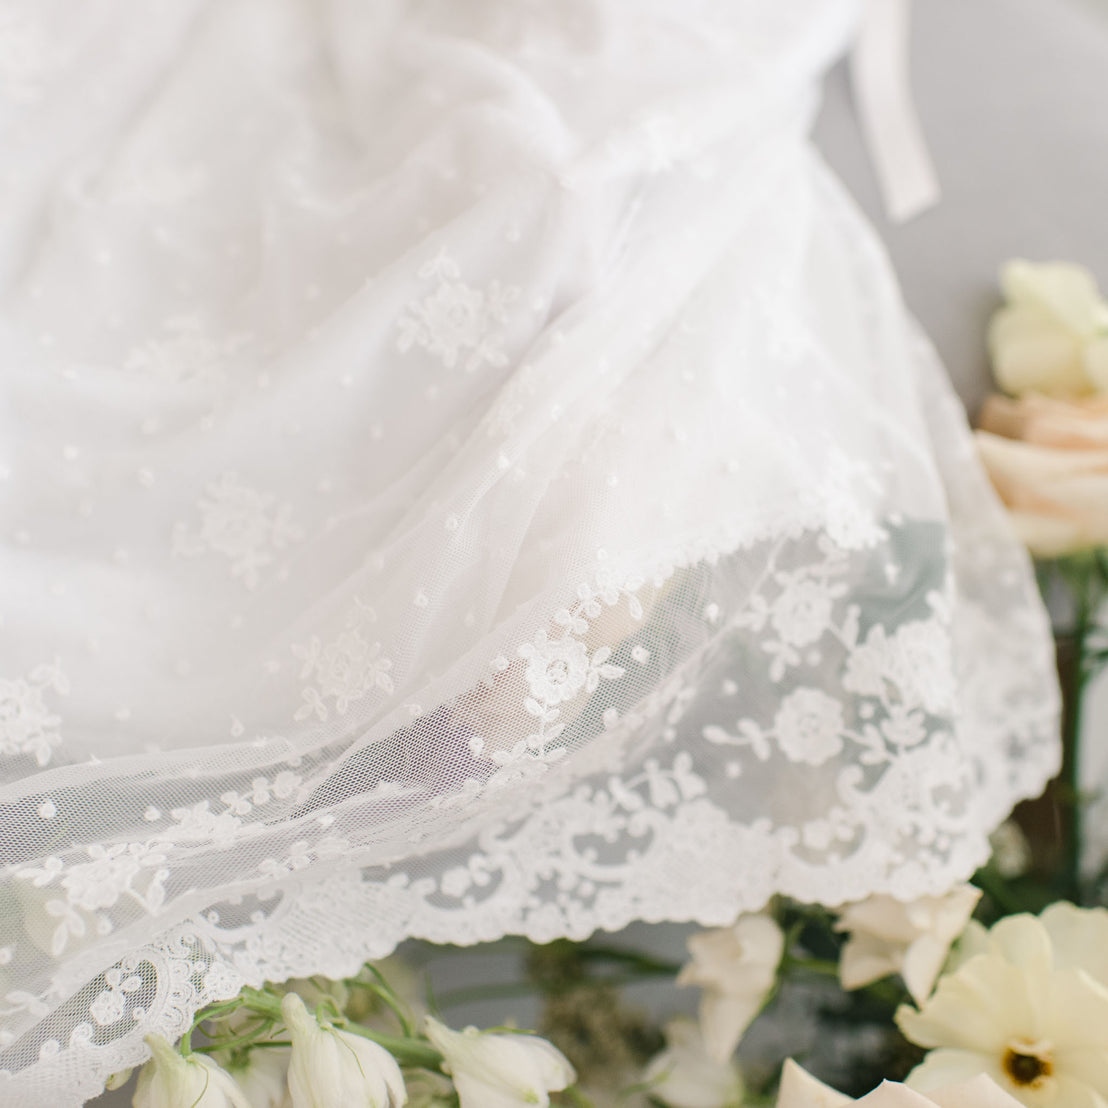 Close-up of a delicate white Melissa Christening Gown & Bonnet featuring detailed lace patterns, partially draped over soft pink and white flowers.